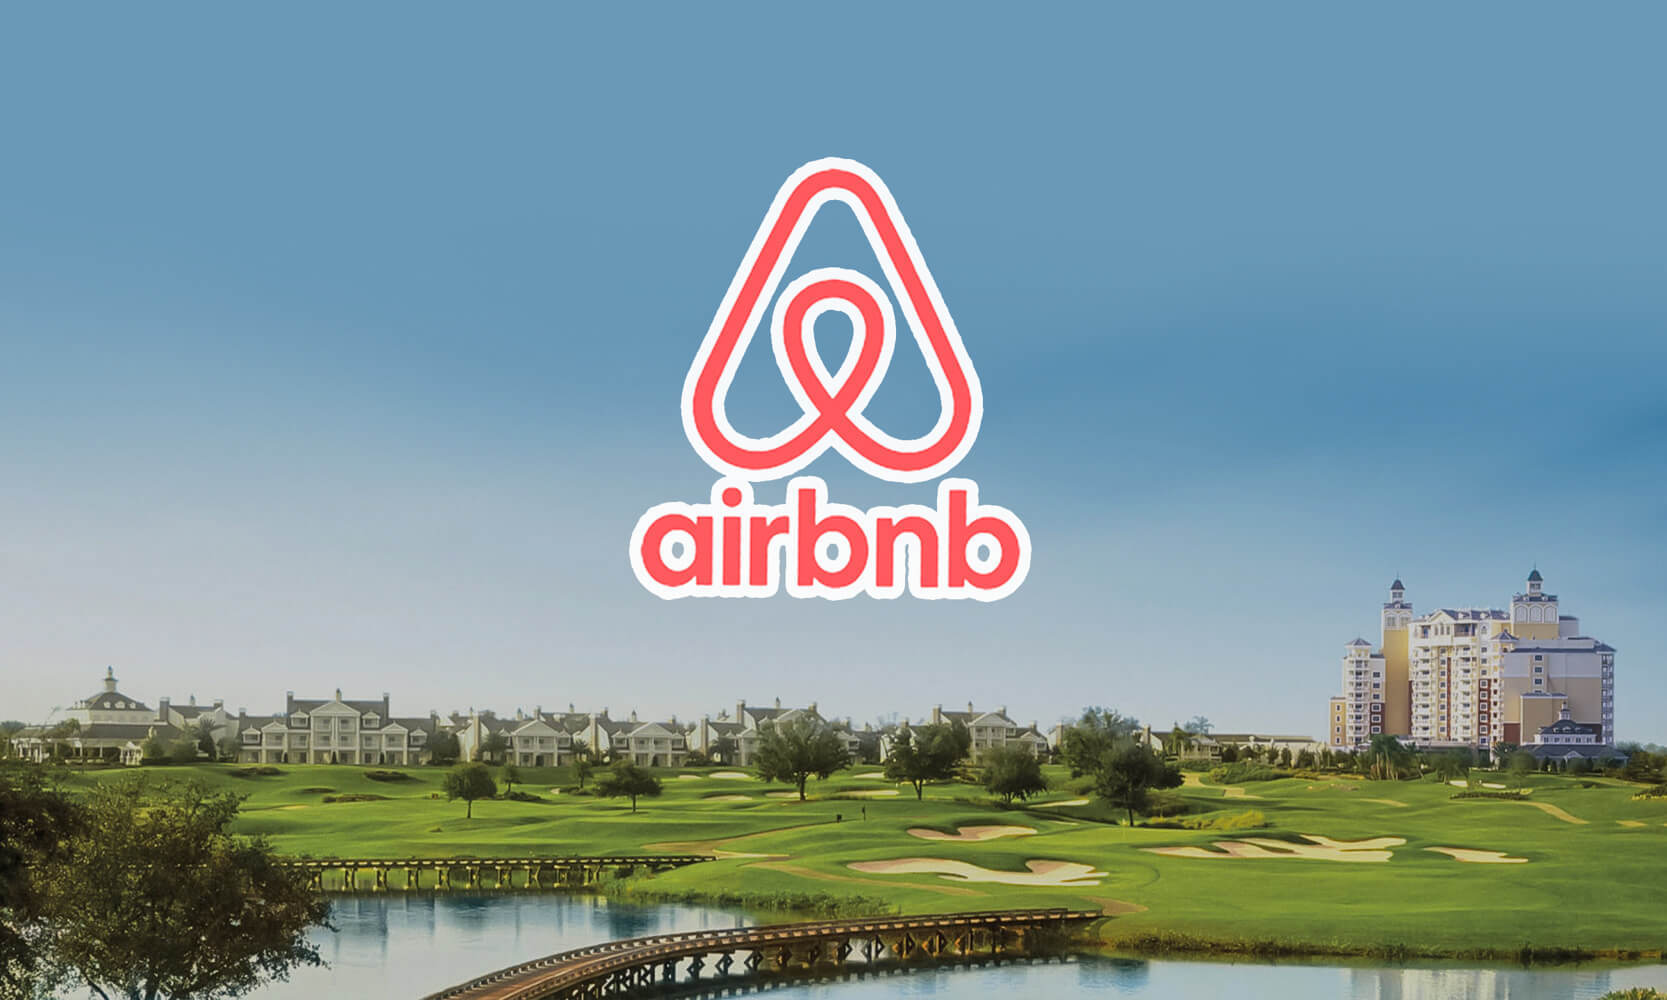 Townhomes and condo complex in Orlando with Airbnb logo